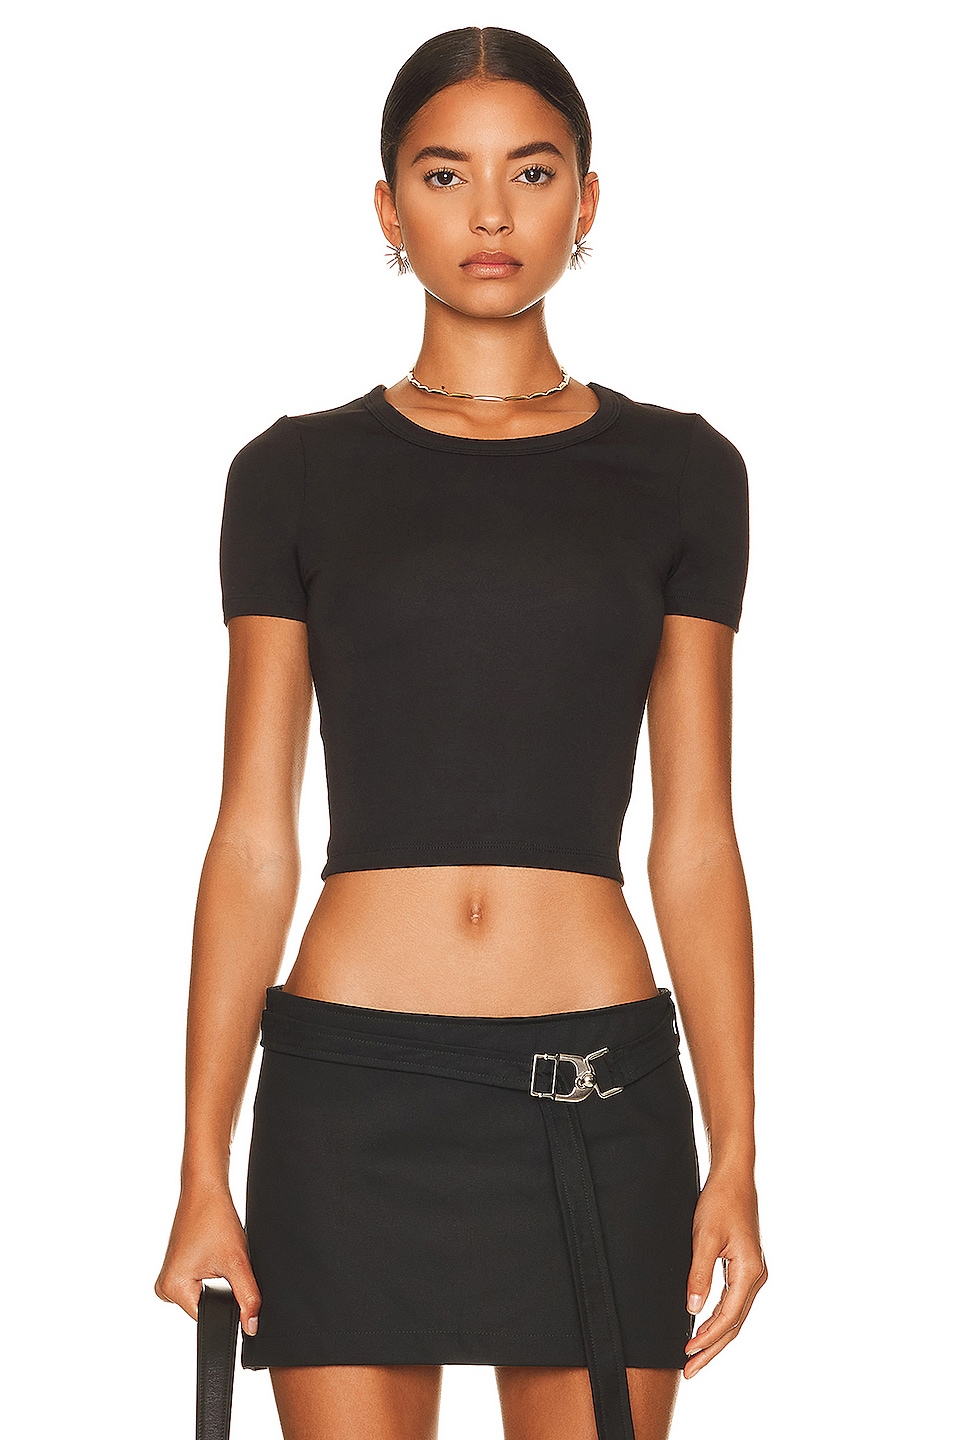 Image 1 of The Range Modal Jersey No Bra Club Cropped Short Sleeve Top in Jet Black